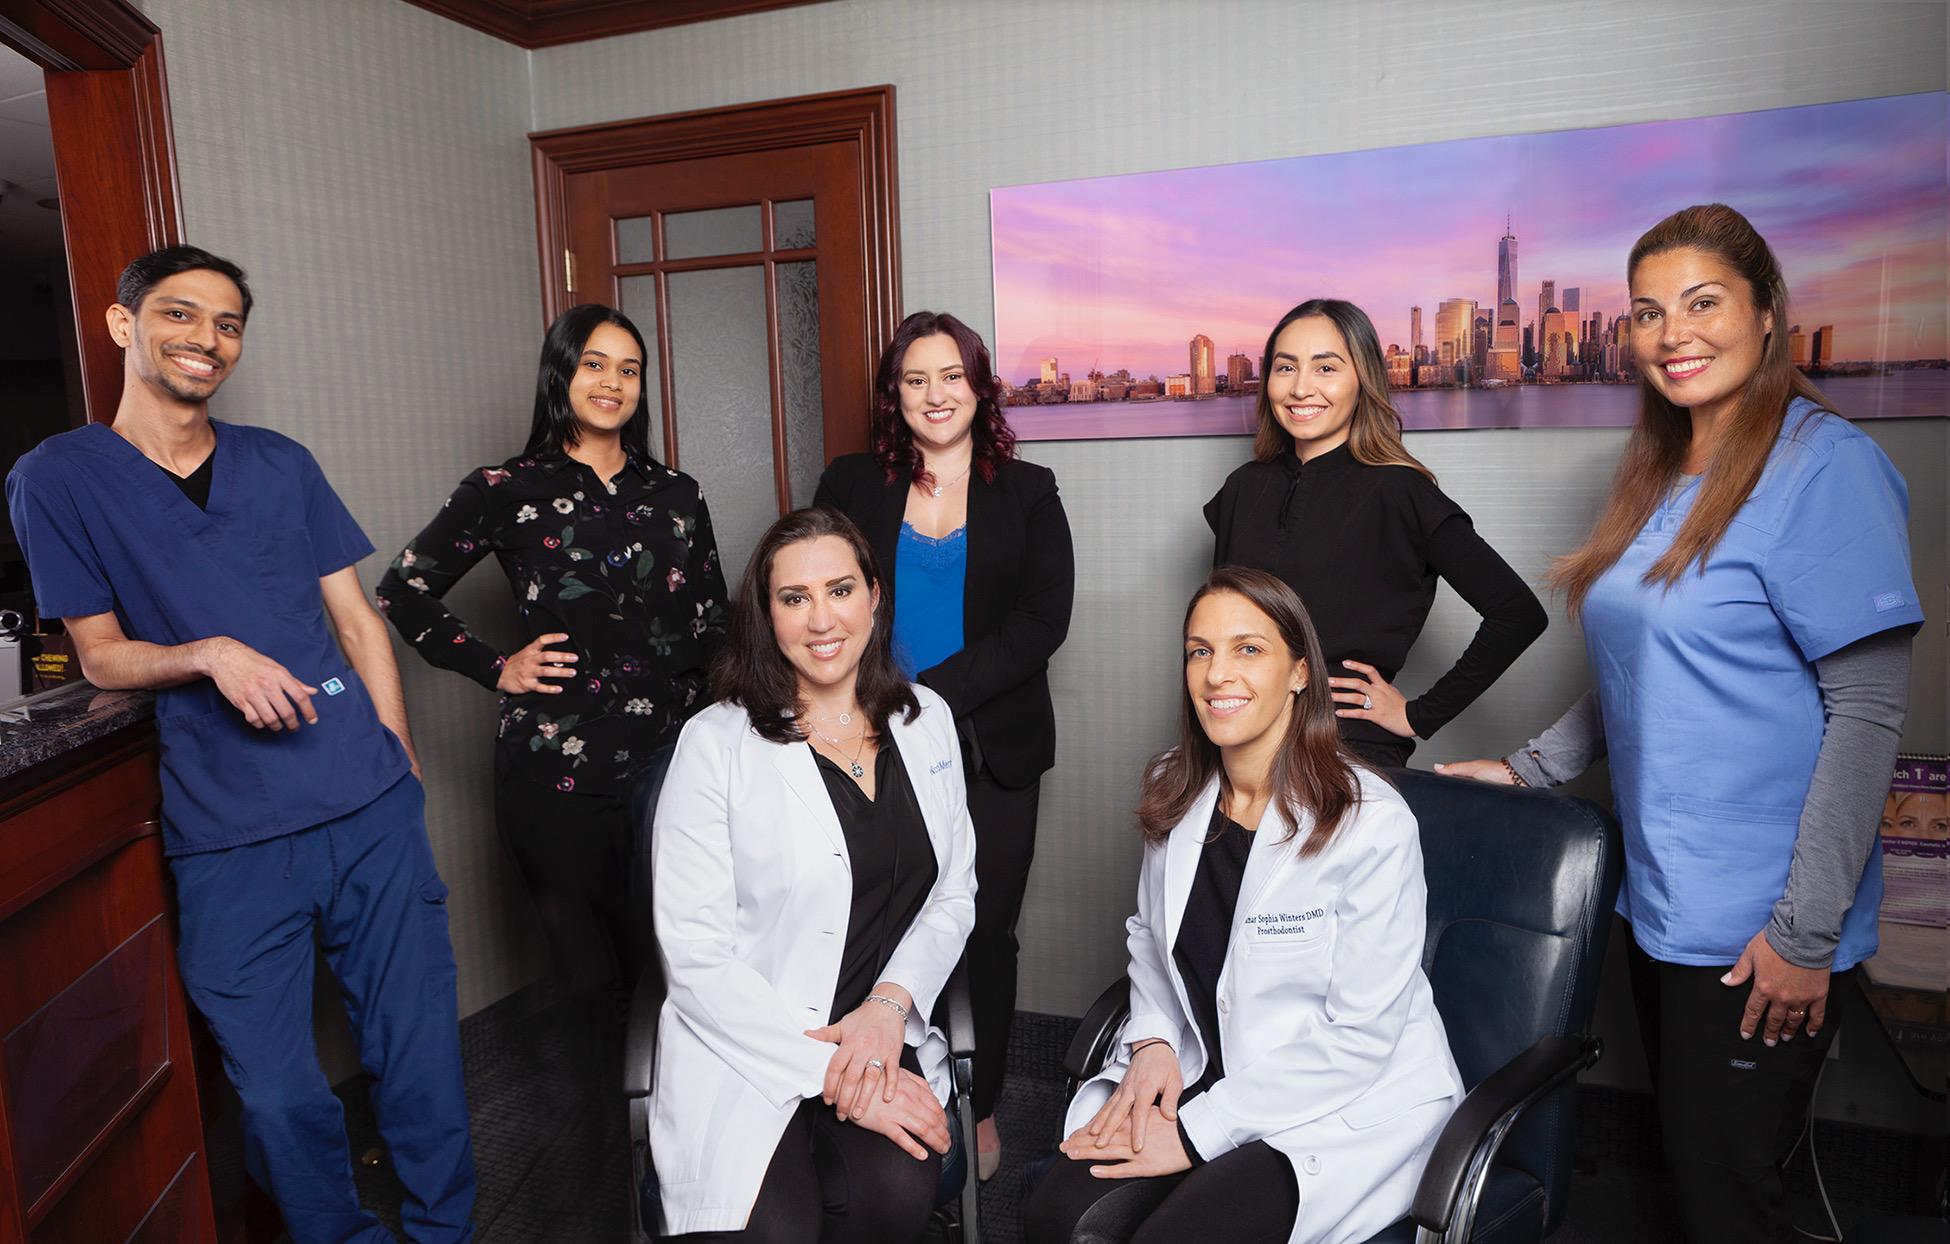 At Metropolitan Dental Care we take pride in creating a friendly, warm, and relaxed environment for  Metropolitan Dental Care New York (212)867-4223